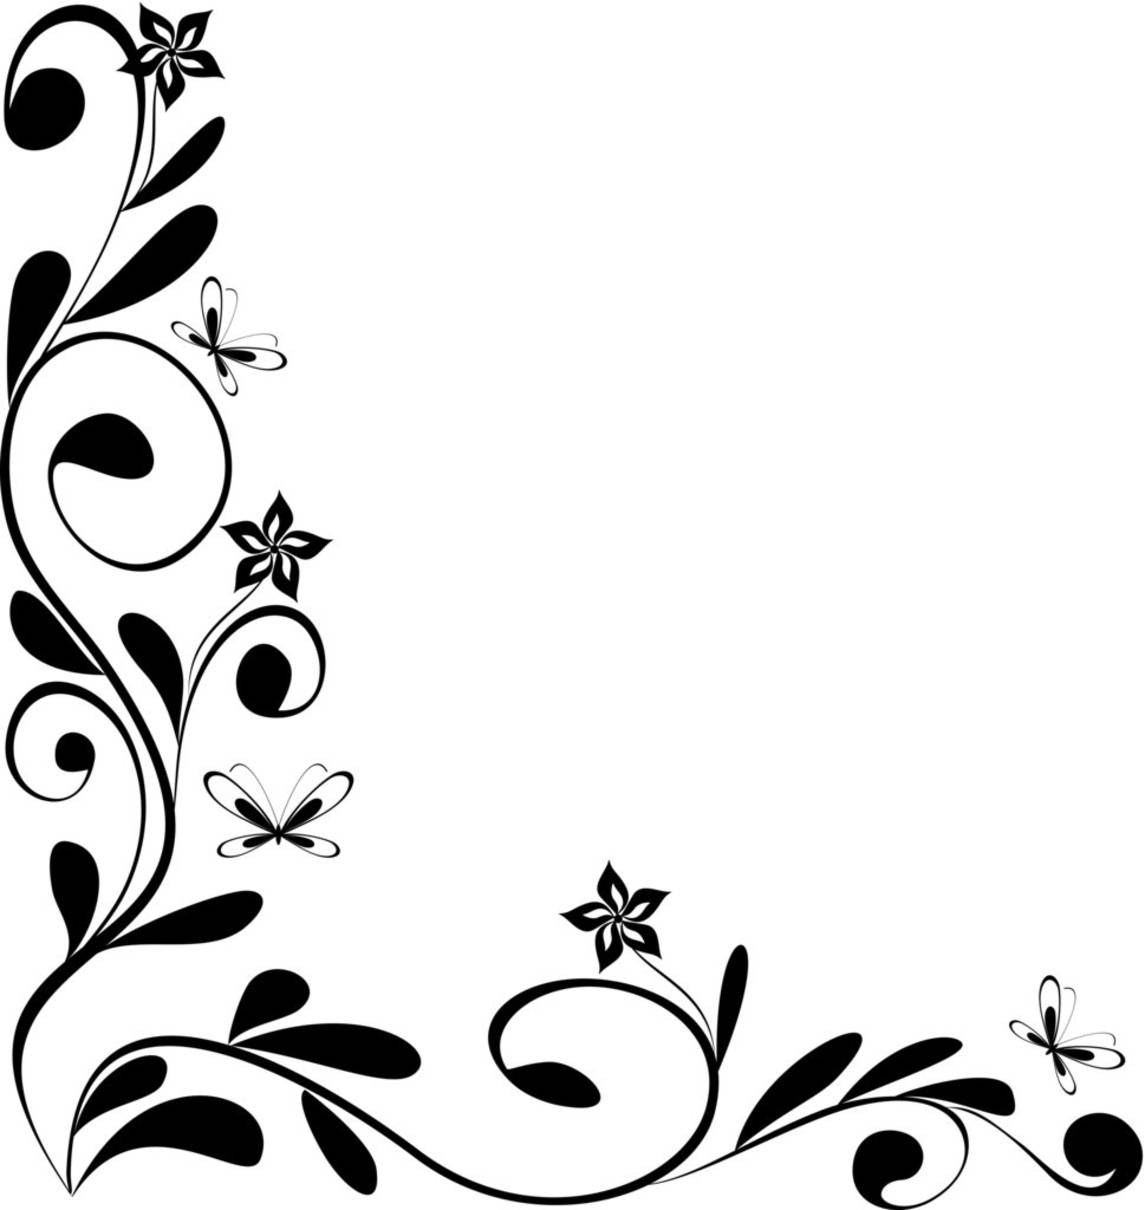 Black And White Flower Border Clip Art Page Kootation - ClipArt ...